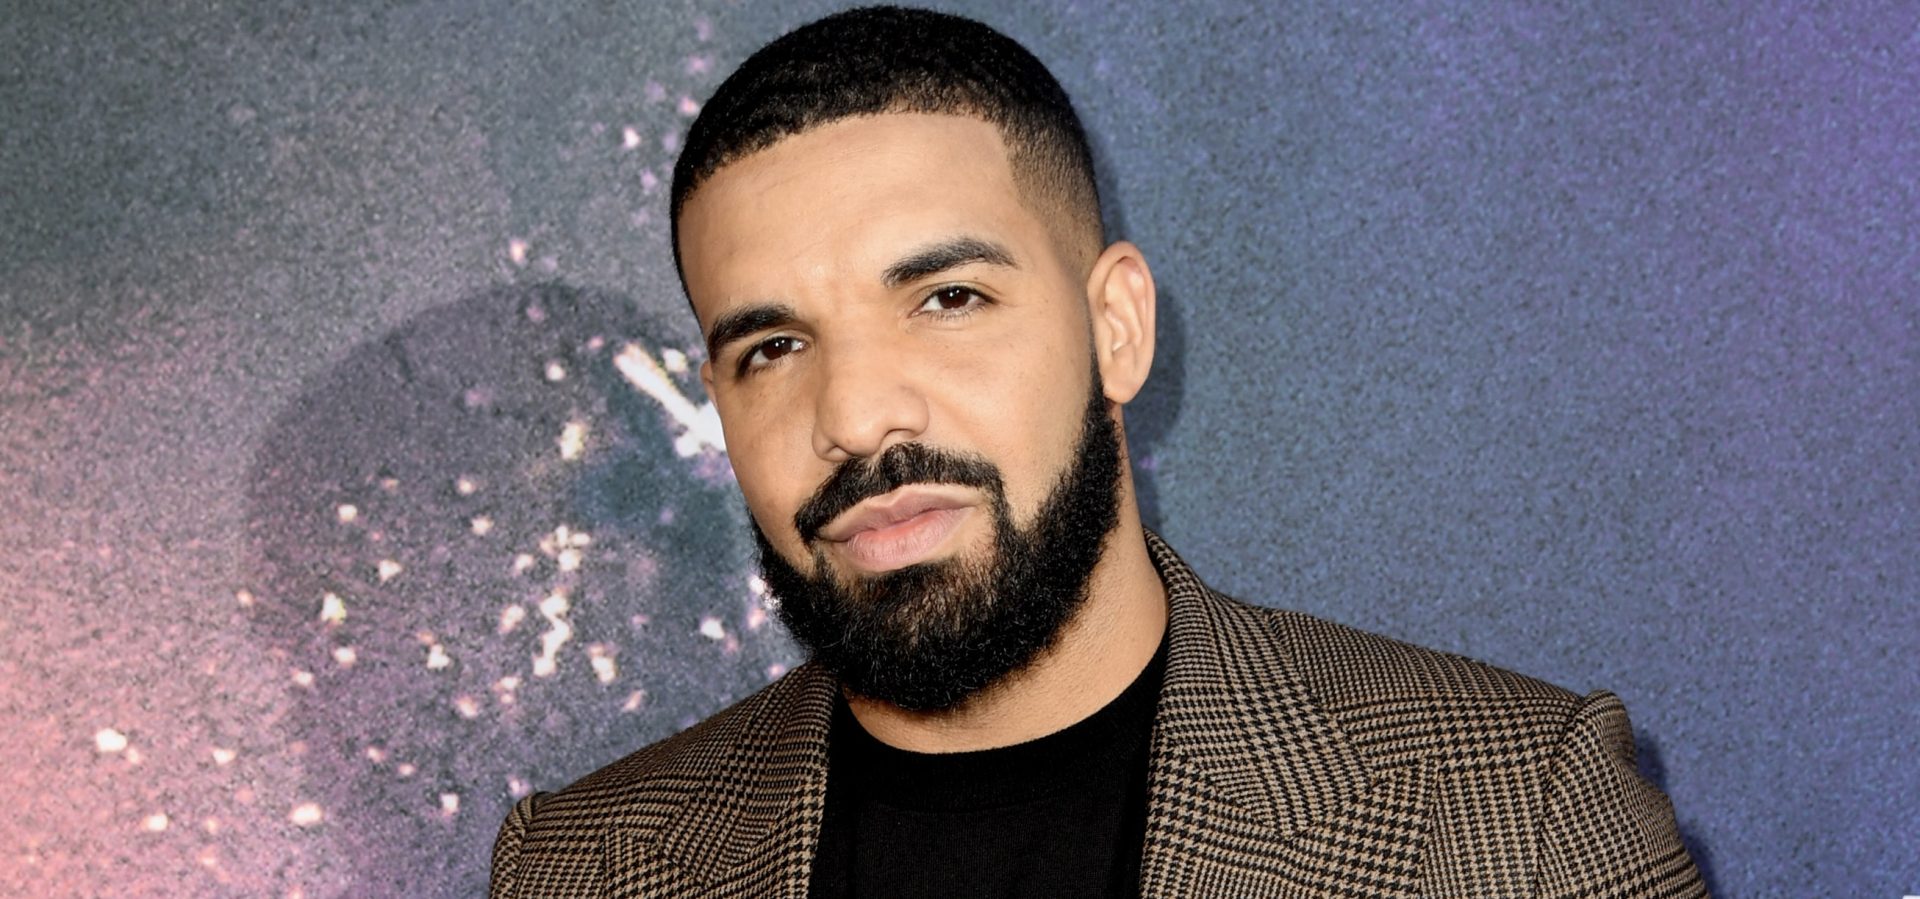 Drake Hangs Up After YouTuber Compliments His ‘Sexy’ Voice